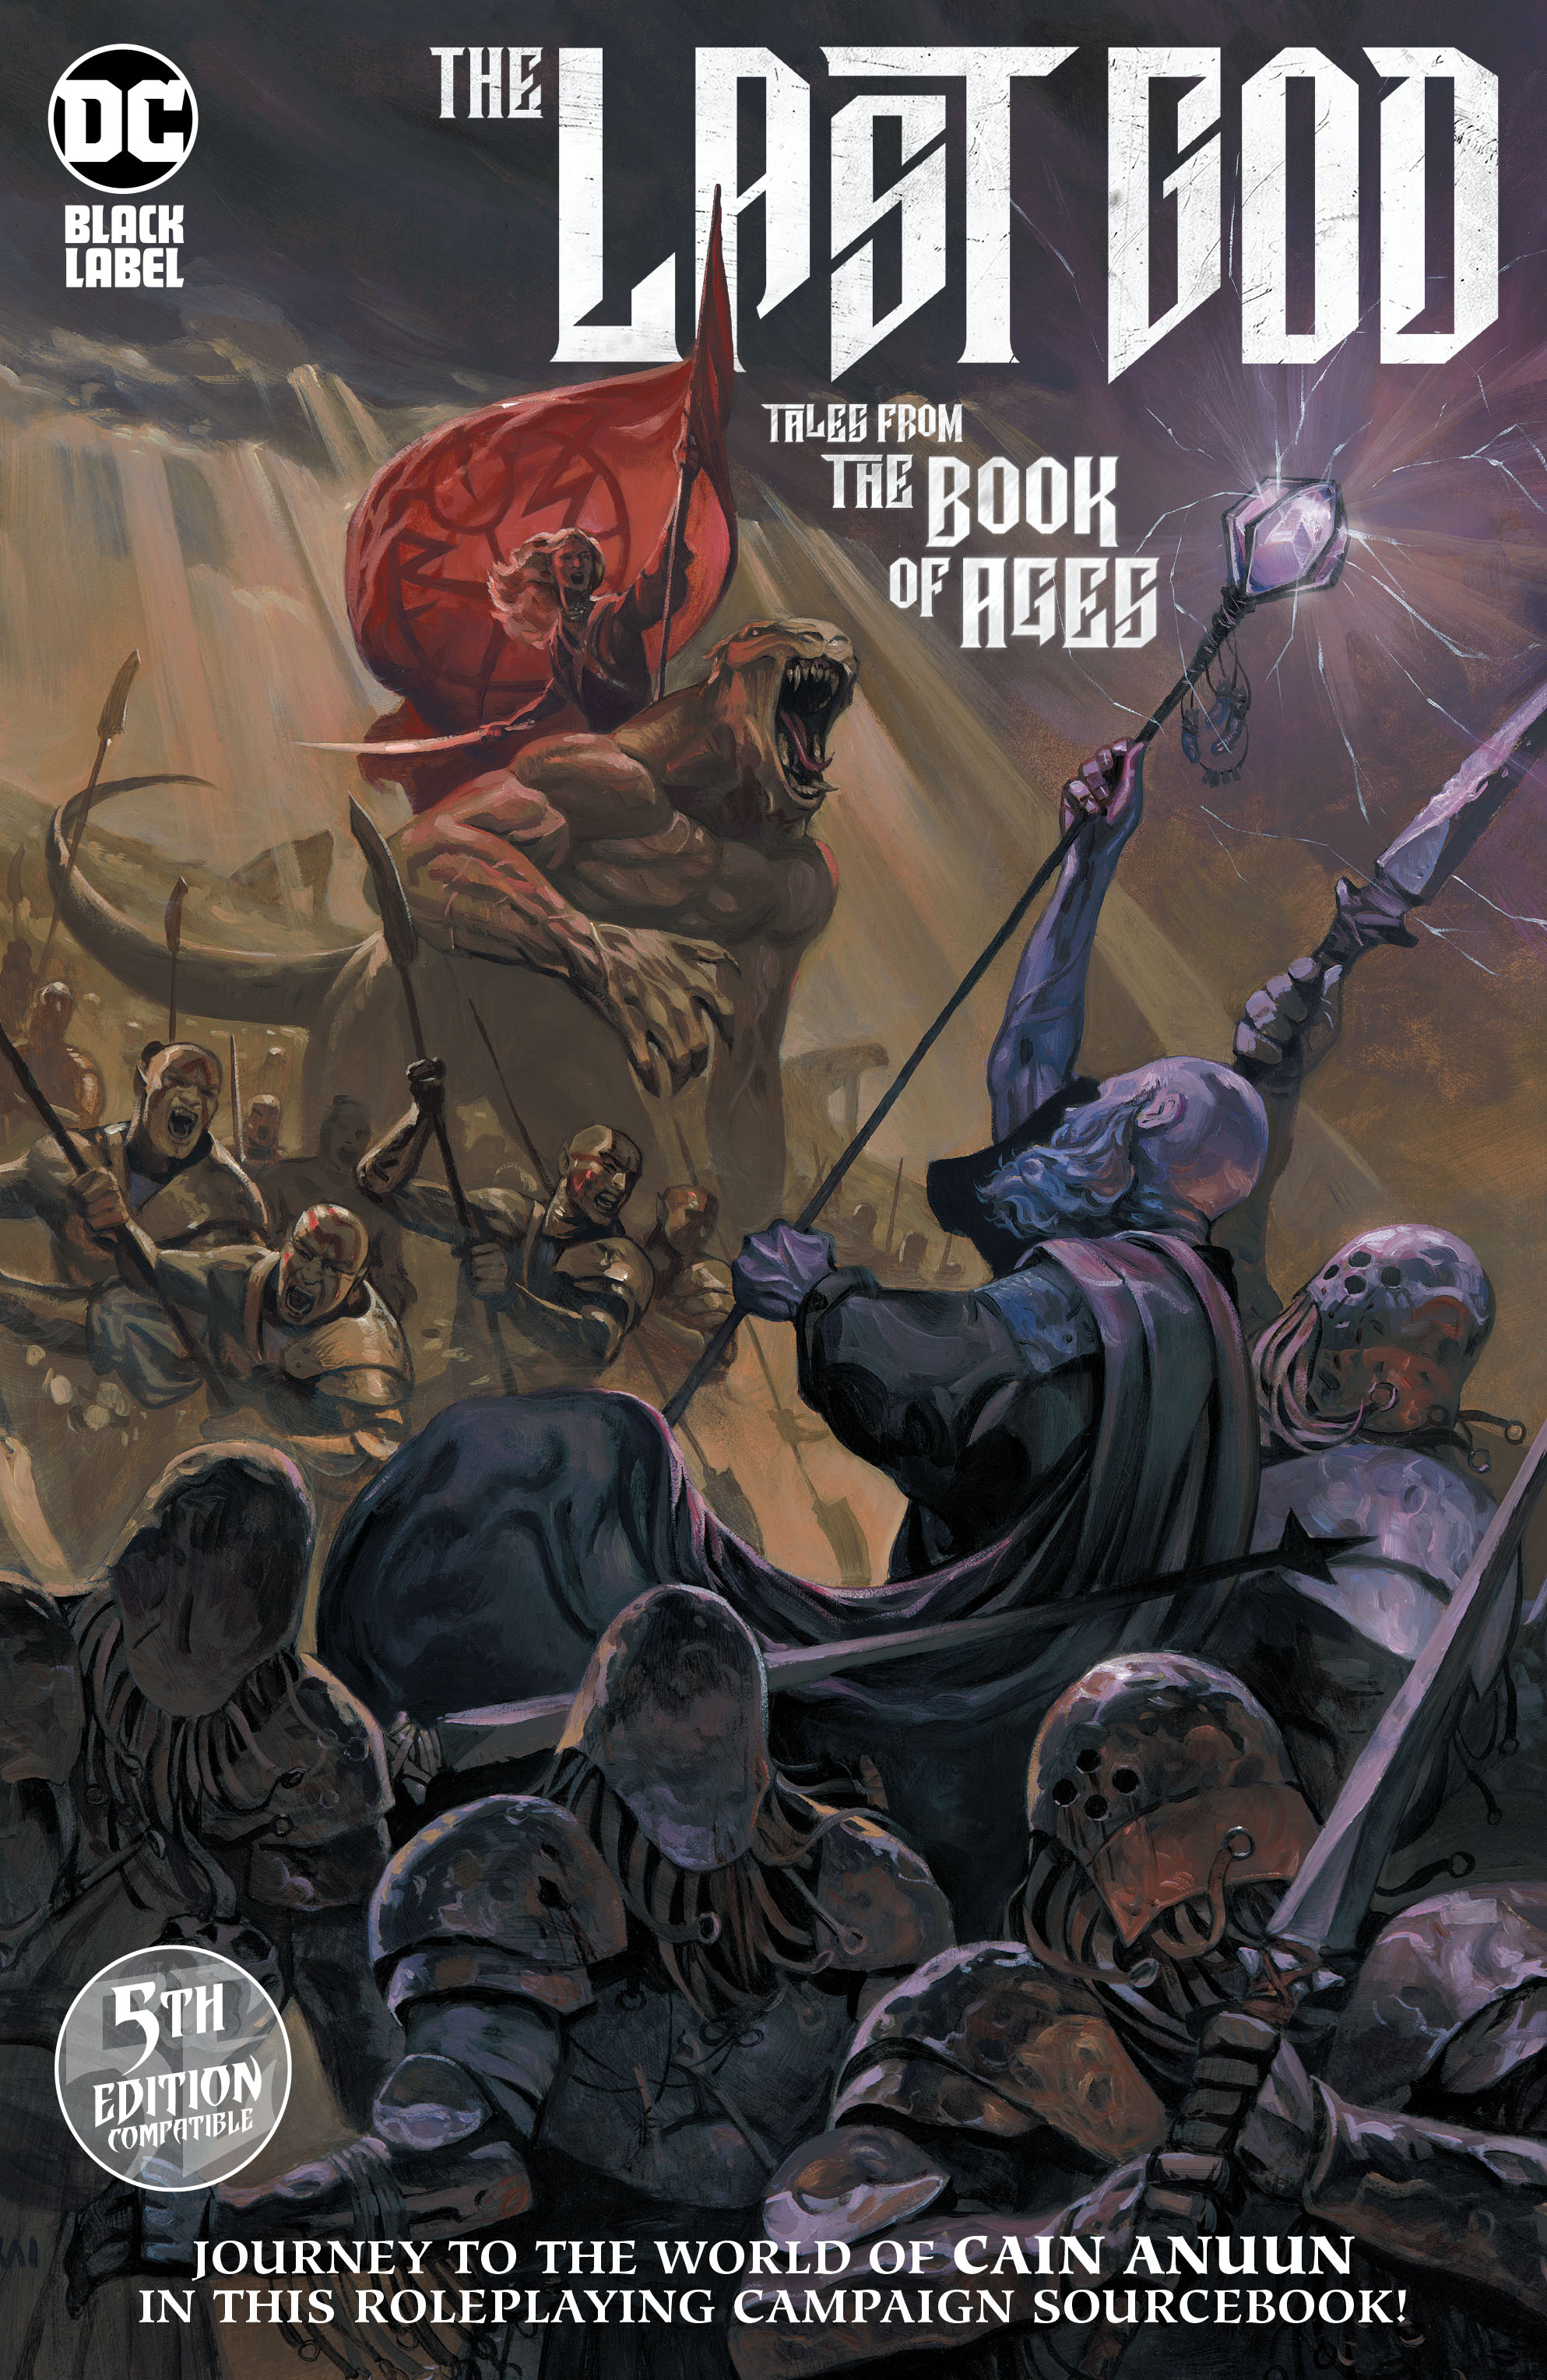 Read online The Last God: Tales From the Book of Ages comic -  Issue # Full - 1